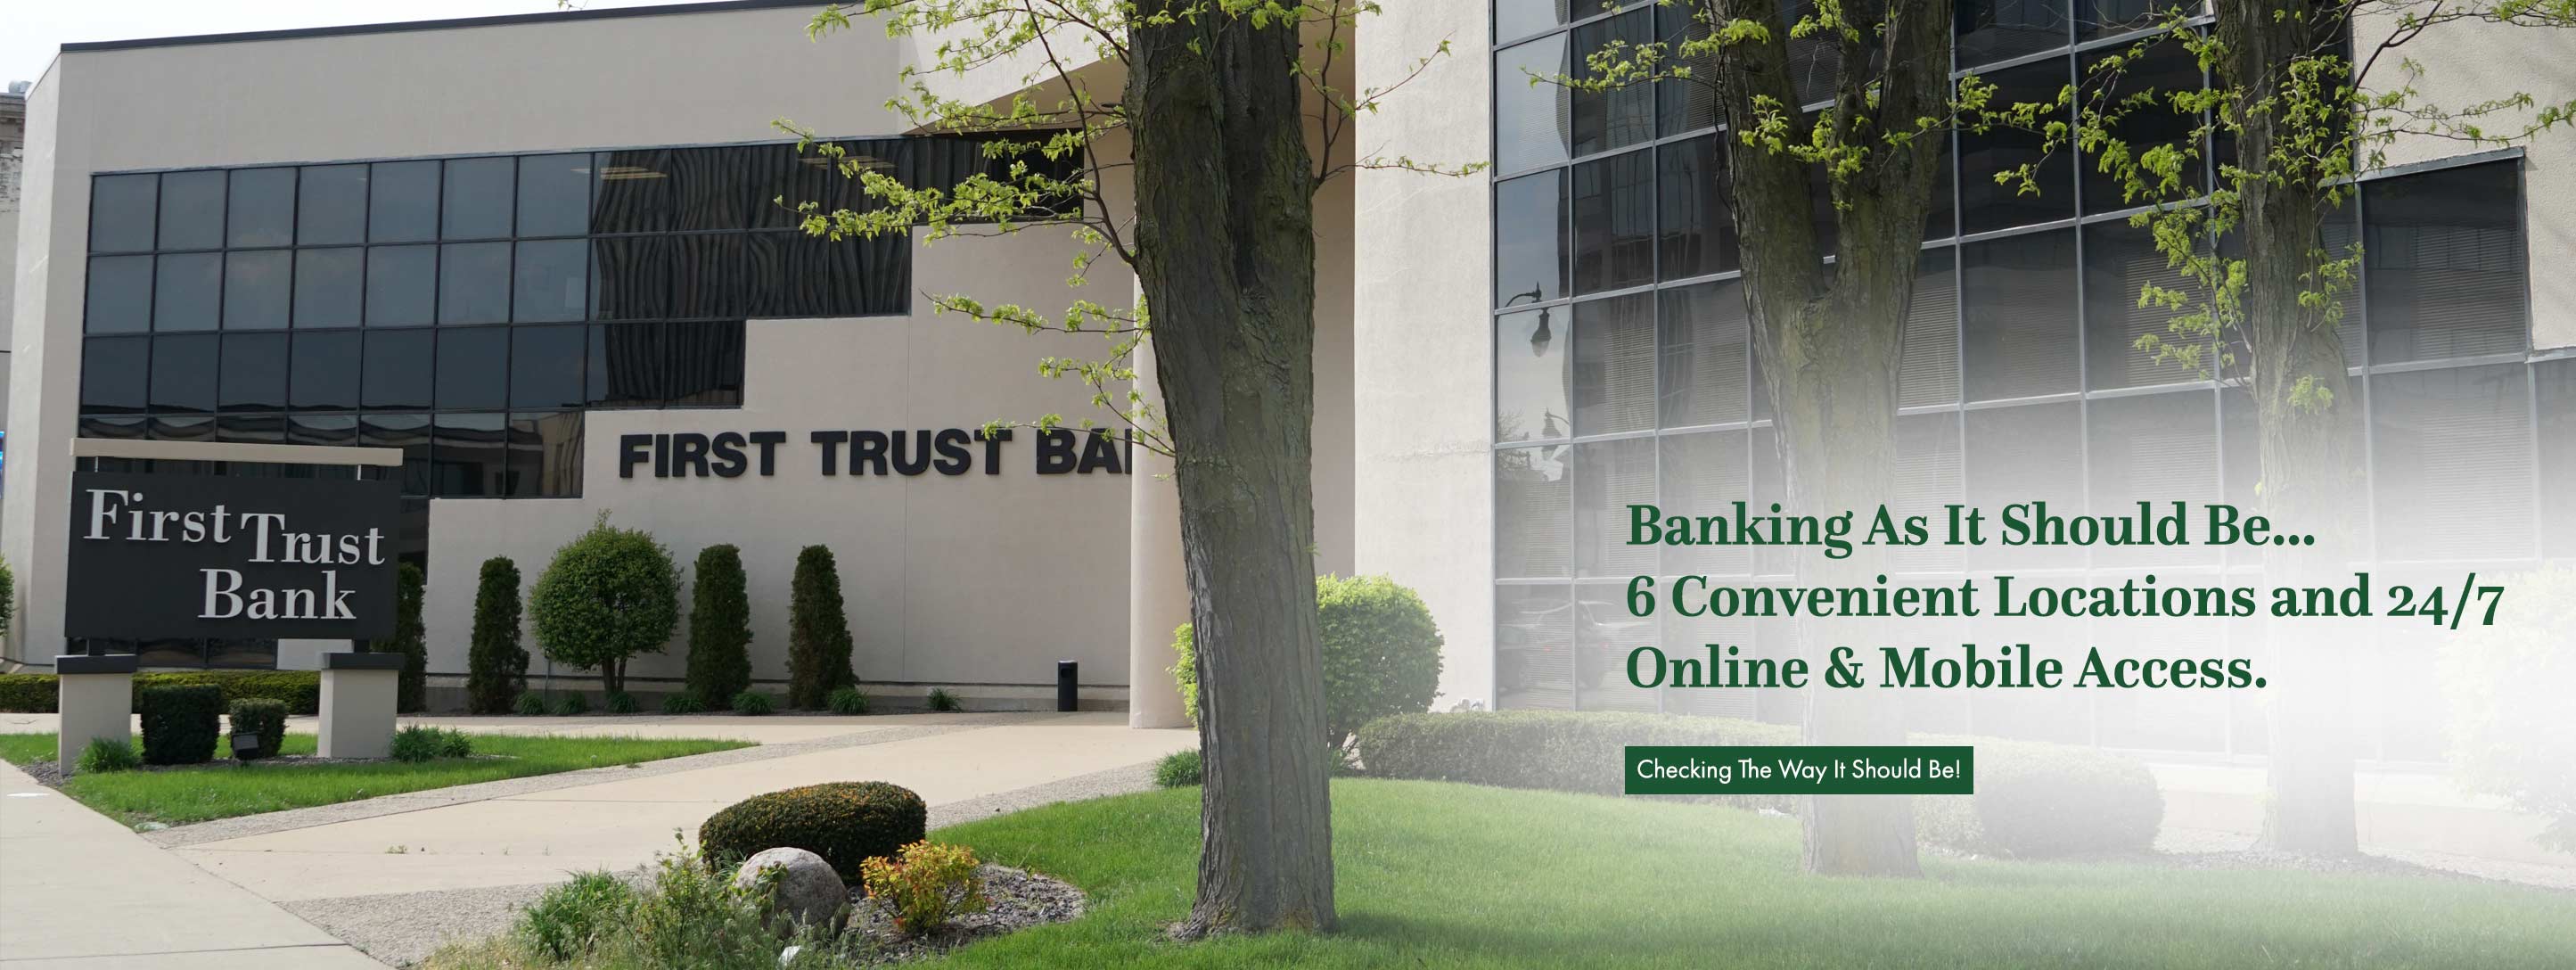 The First Trust Bank Advantage. Expert advice and personal service from a strong, secure, local bank. The FTB Advantage